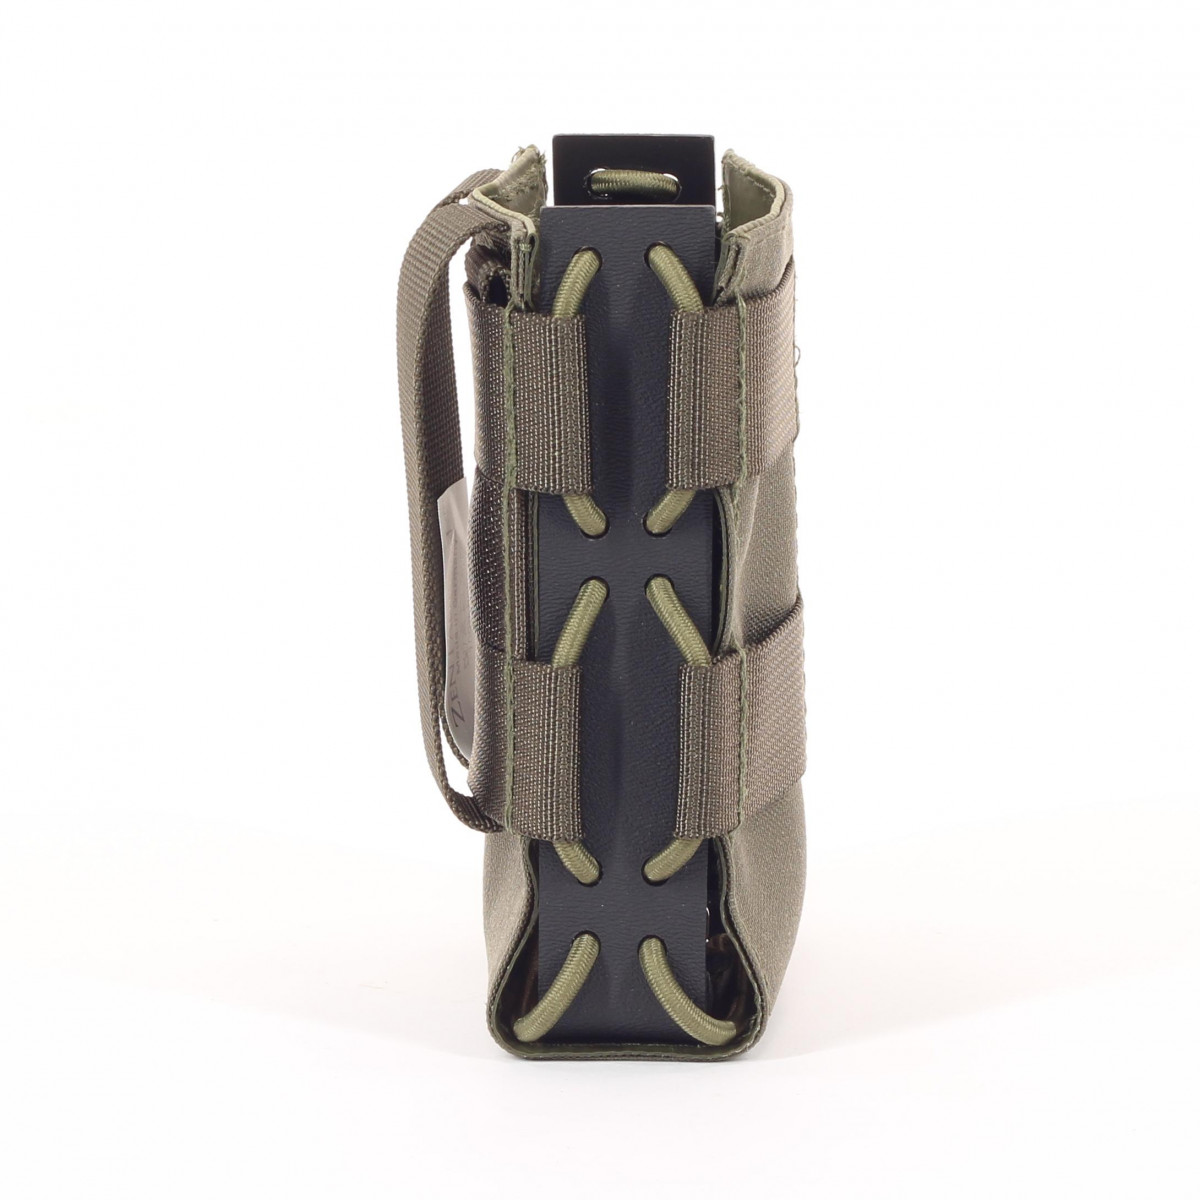 Quick-draw magazine pouch G36 short G3 in stone gray-olive